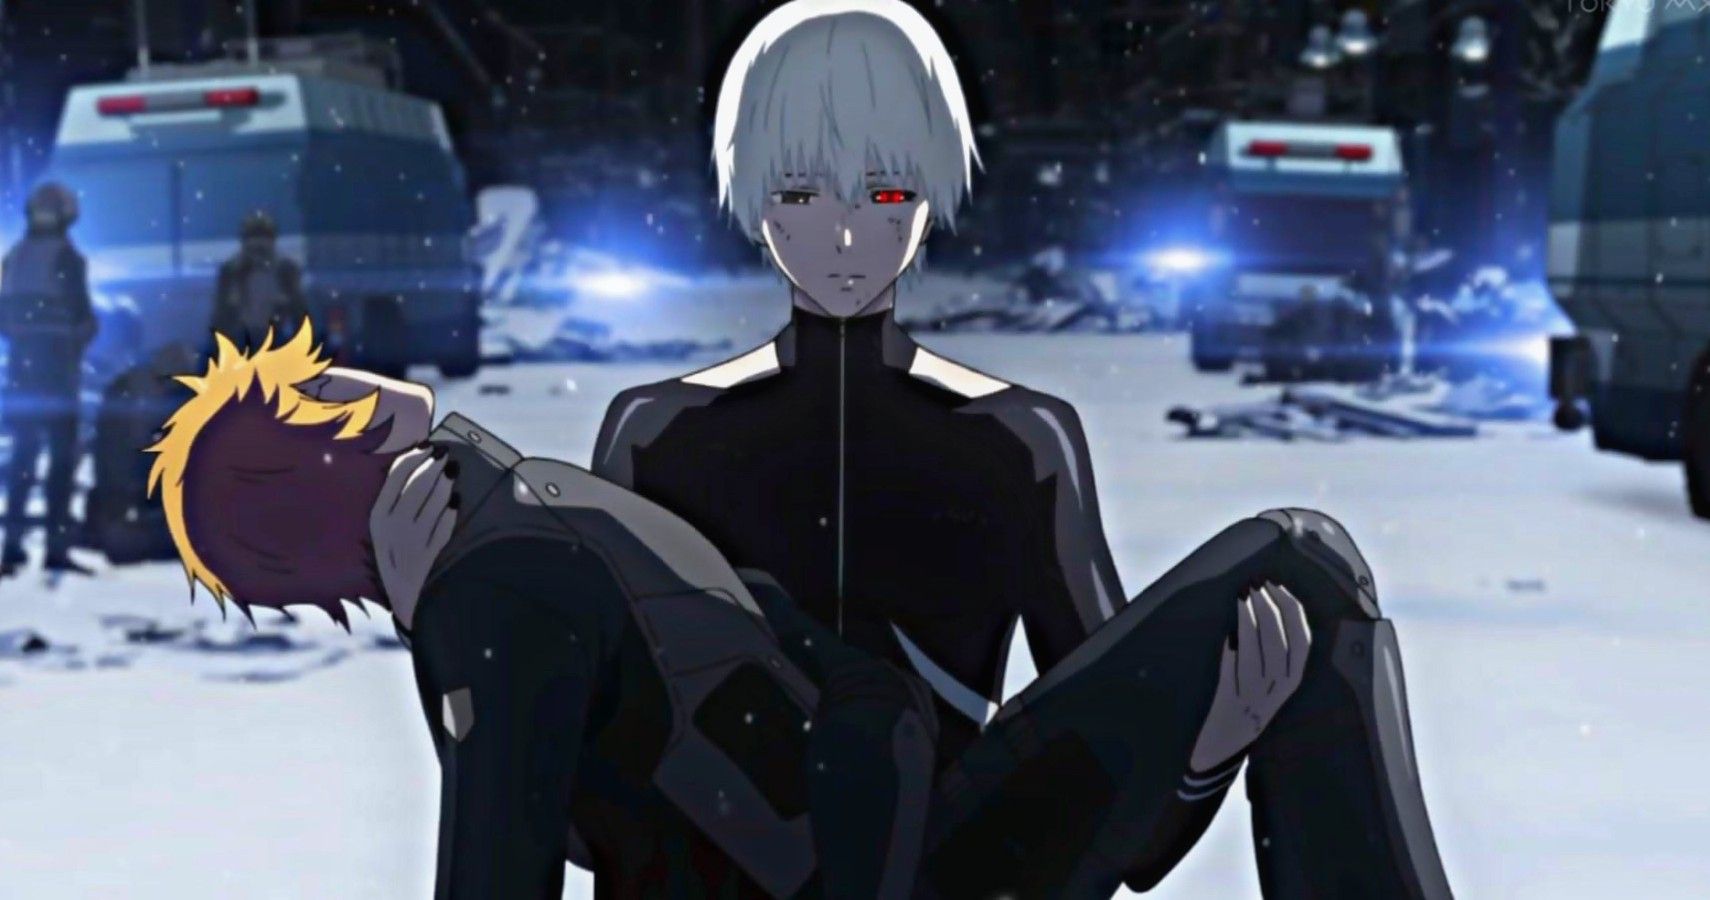 Tokyo Ghoul The 10 Saddest Character Deaths Ranked Cbr Tokyo ghoul is a dark fantasy manga anime series illustrated by sui ishida. tokyo ghoul the 10 saddest character